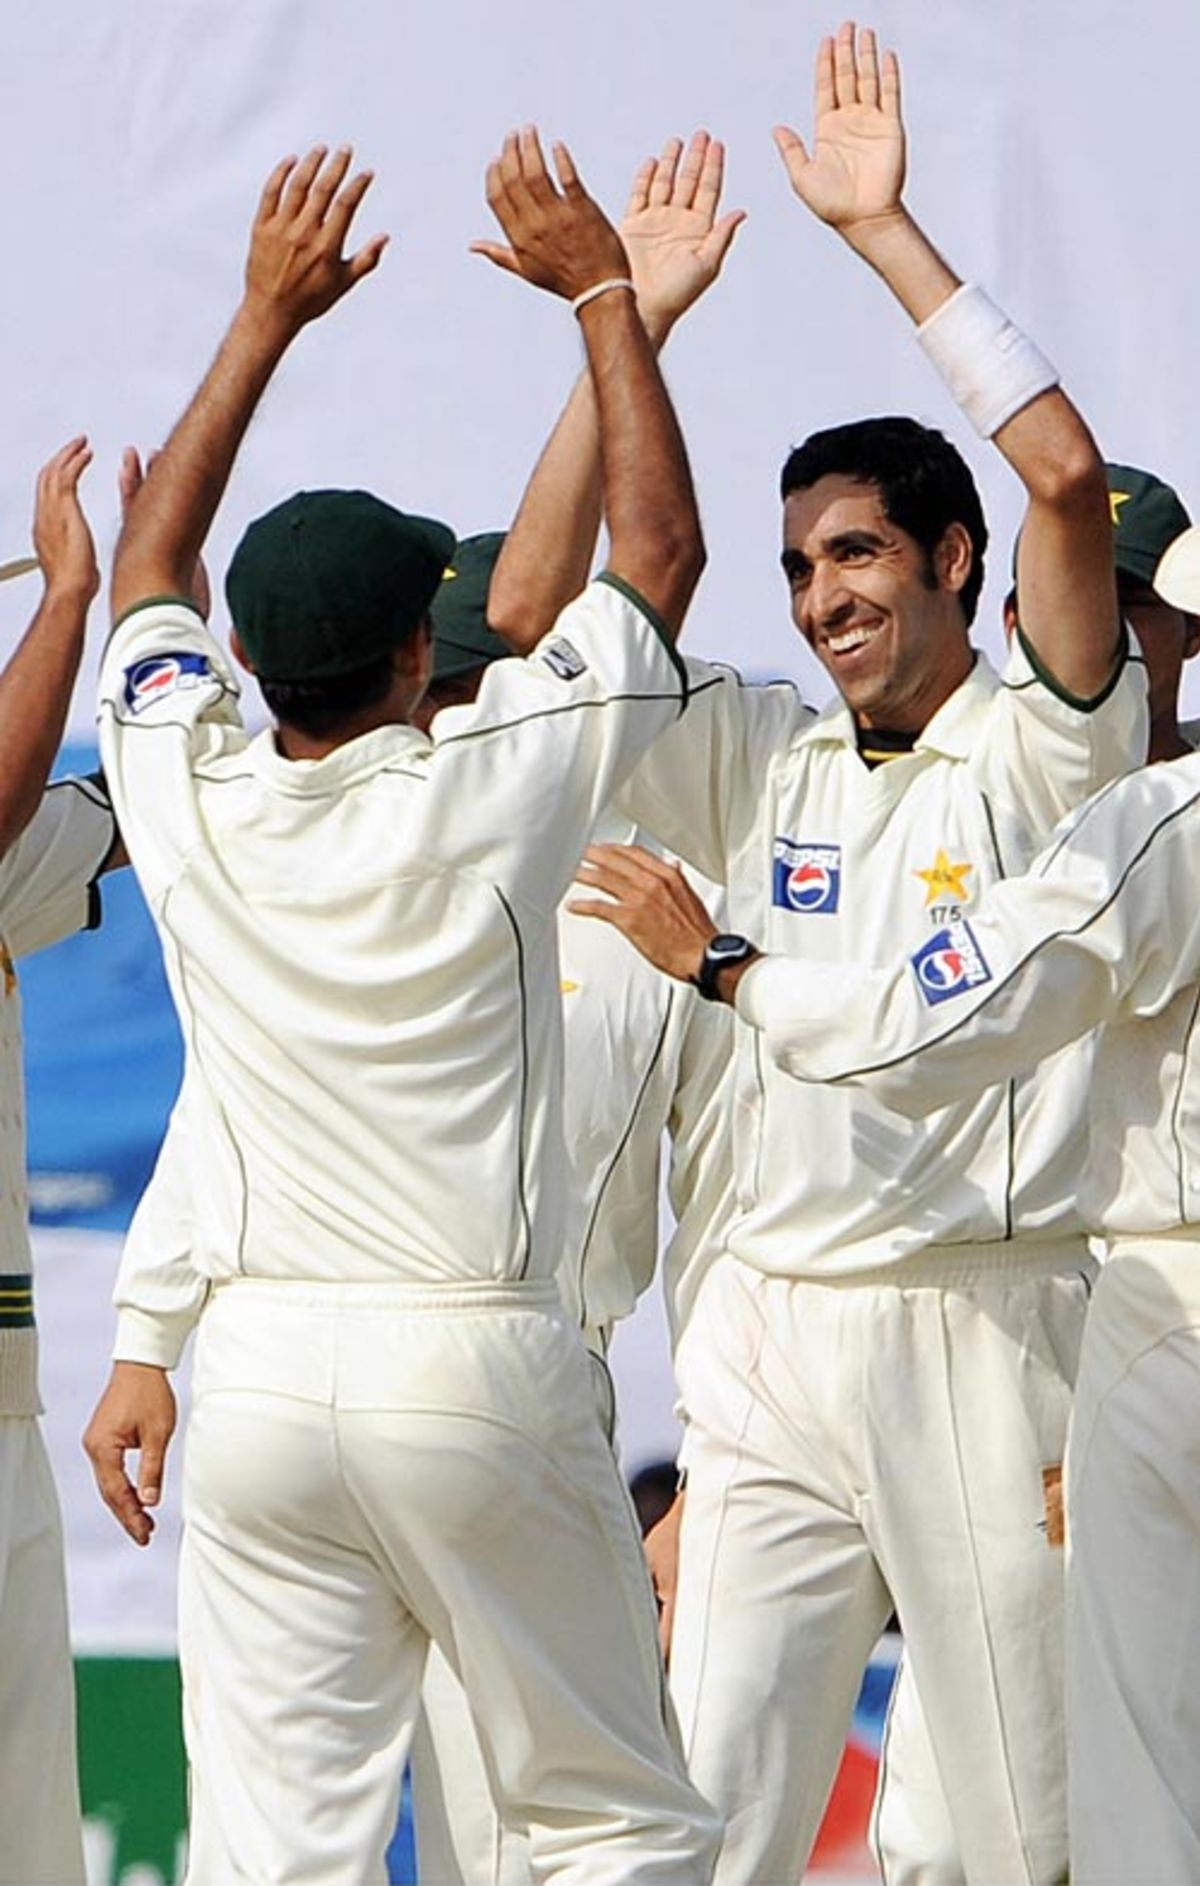 Umar Gul is congratulated by team-mates after picking up his sixth wicket, Pakistan v Sri Lanka, 2nd Test, 2nd day, March 2, 2009